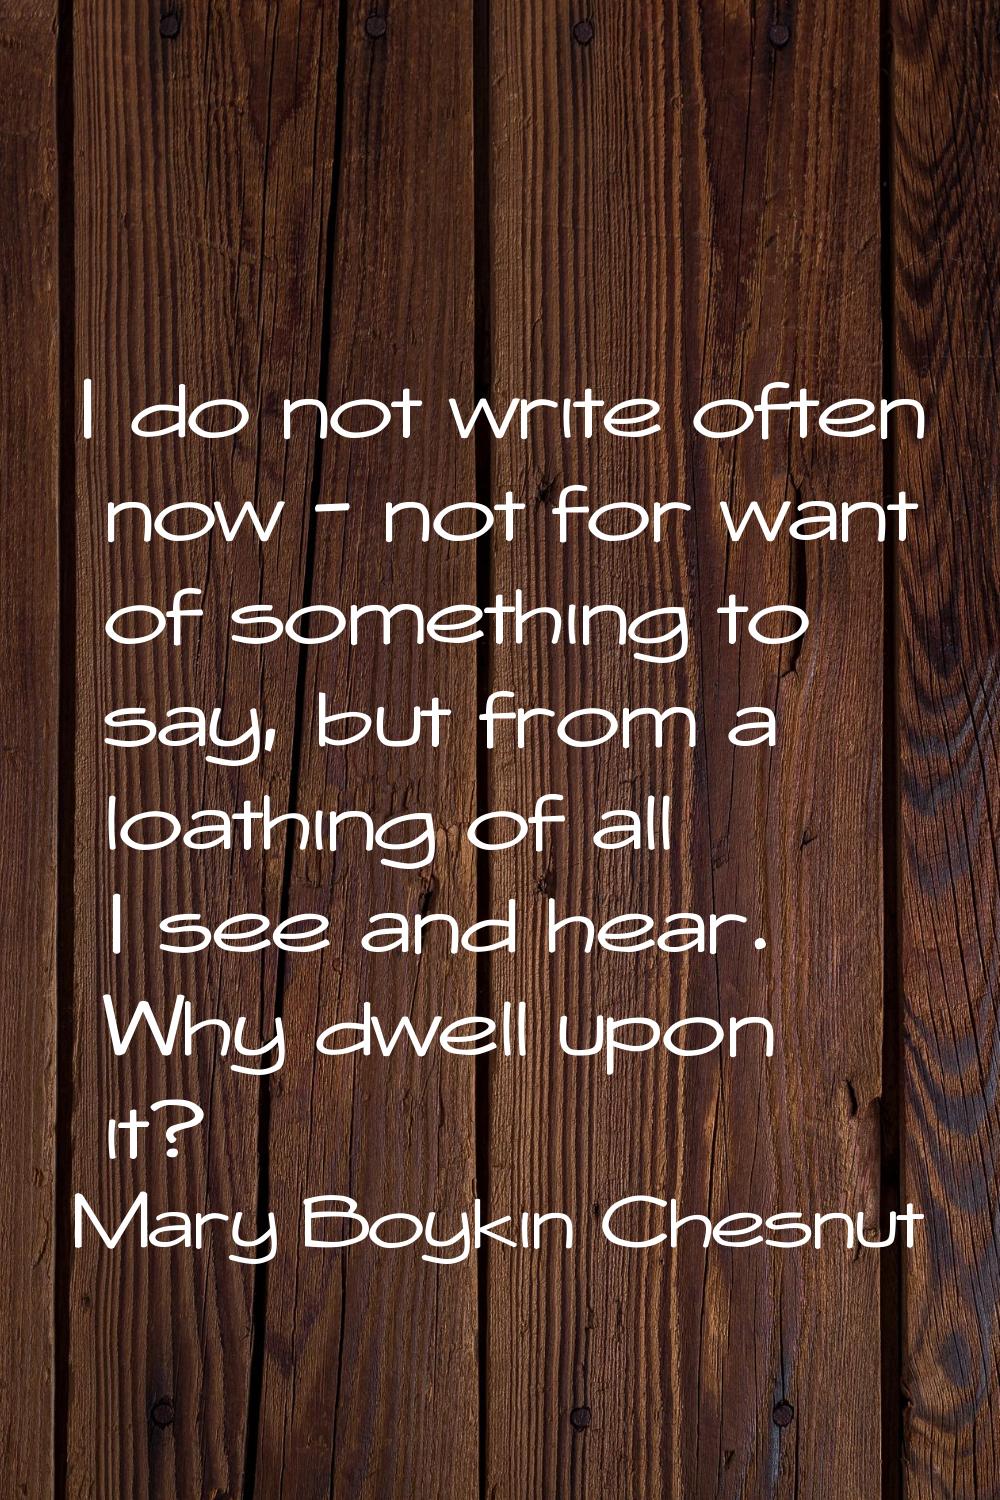 I do not write often now - not for want of something to say, but from a loathing of all I see and h